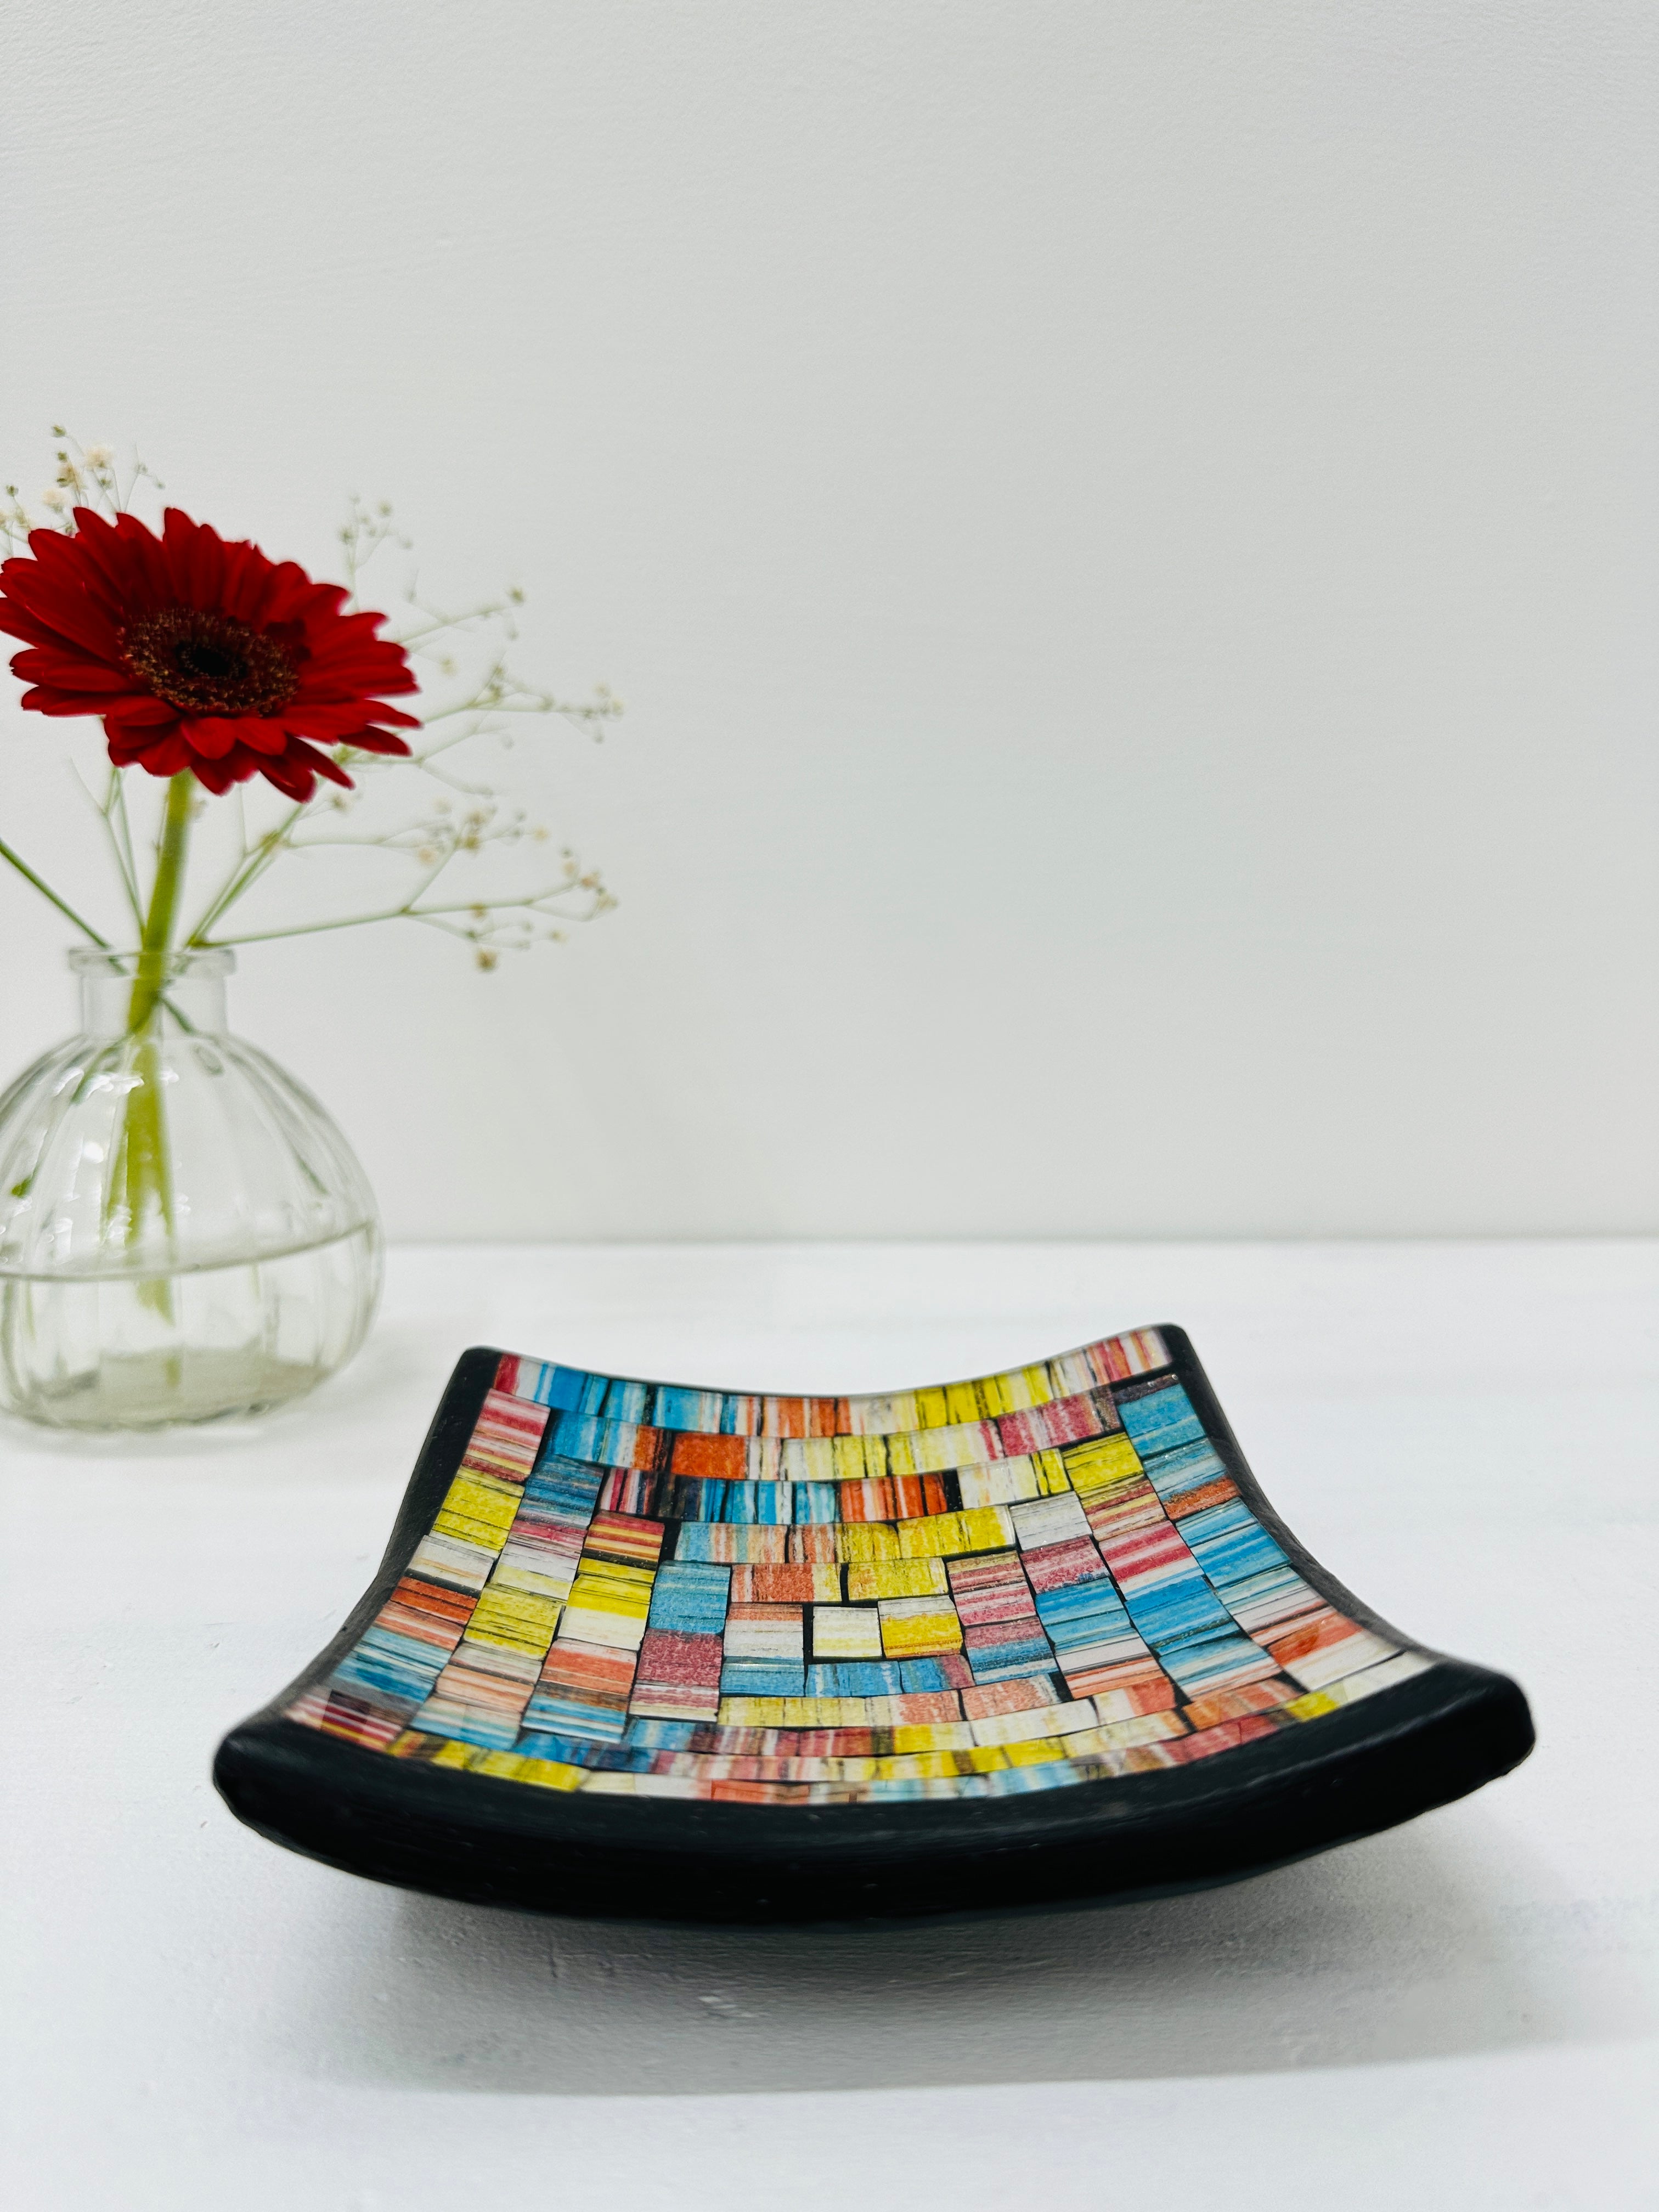 side view of mosaic square plate